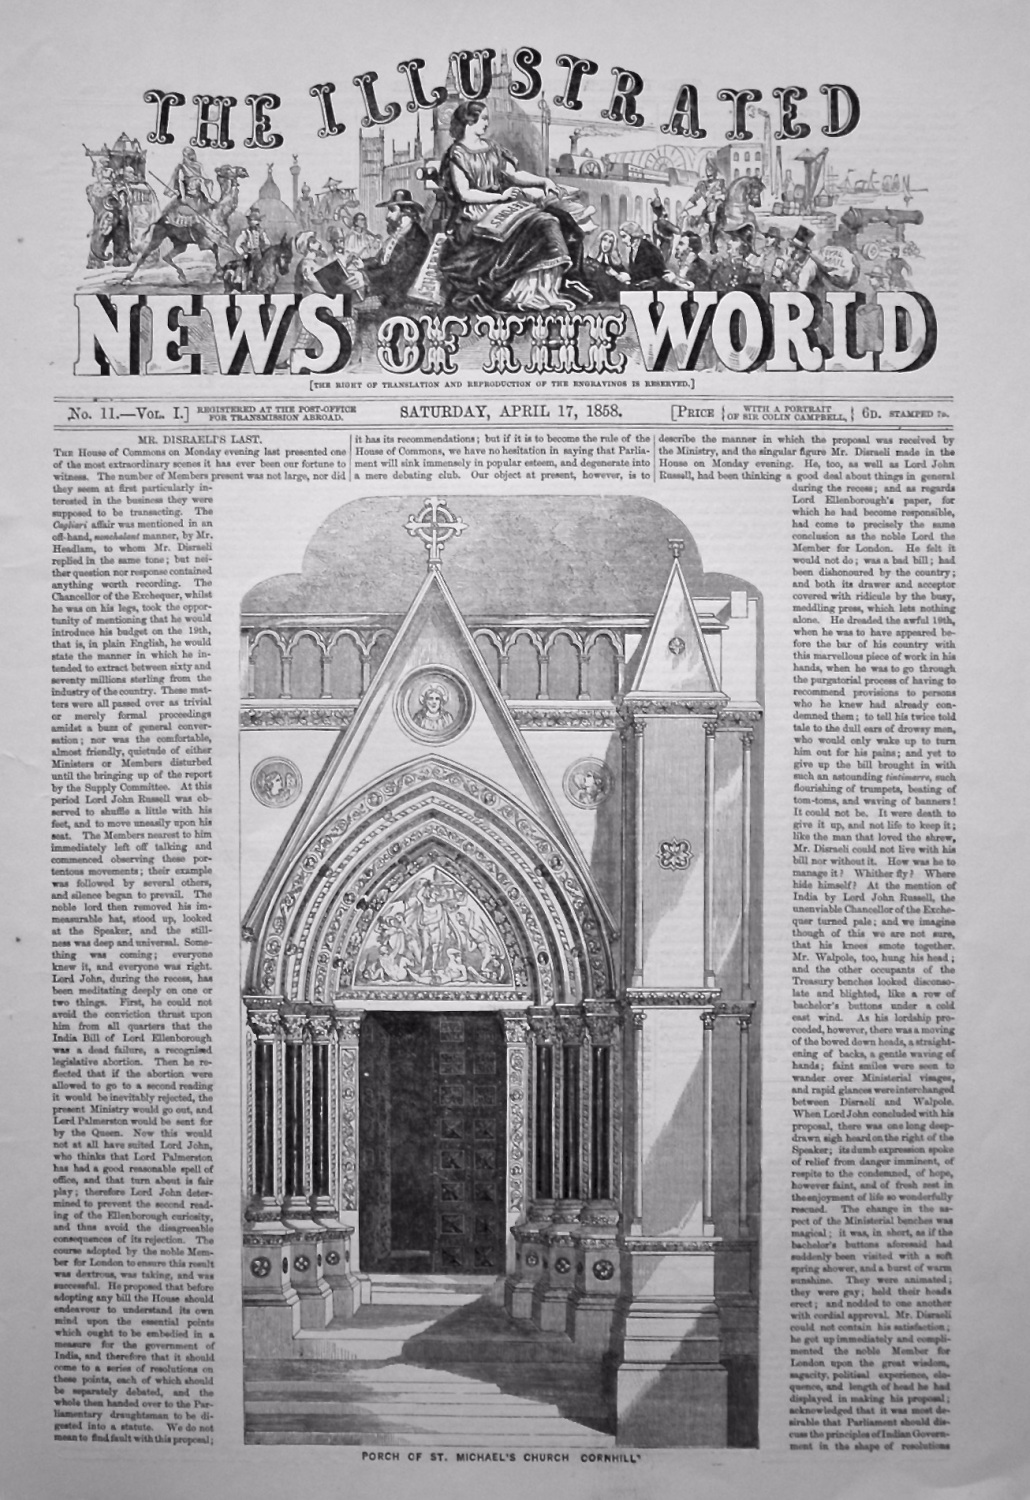 The Illustrated News of the World, April 17th, 1858.